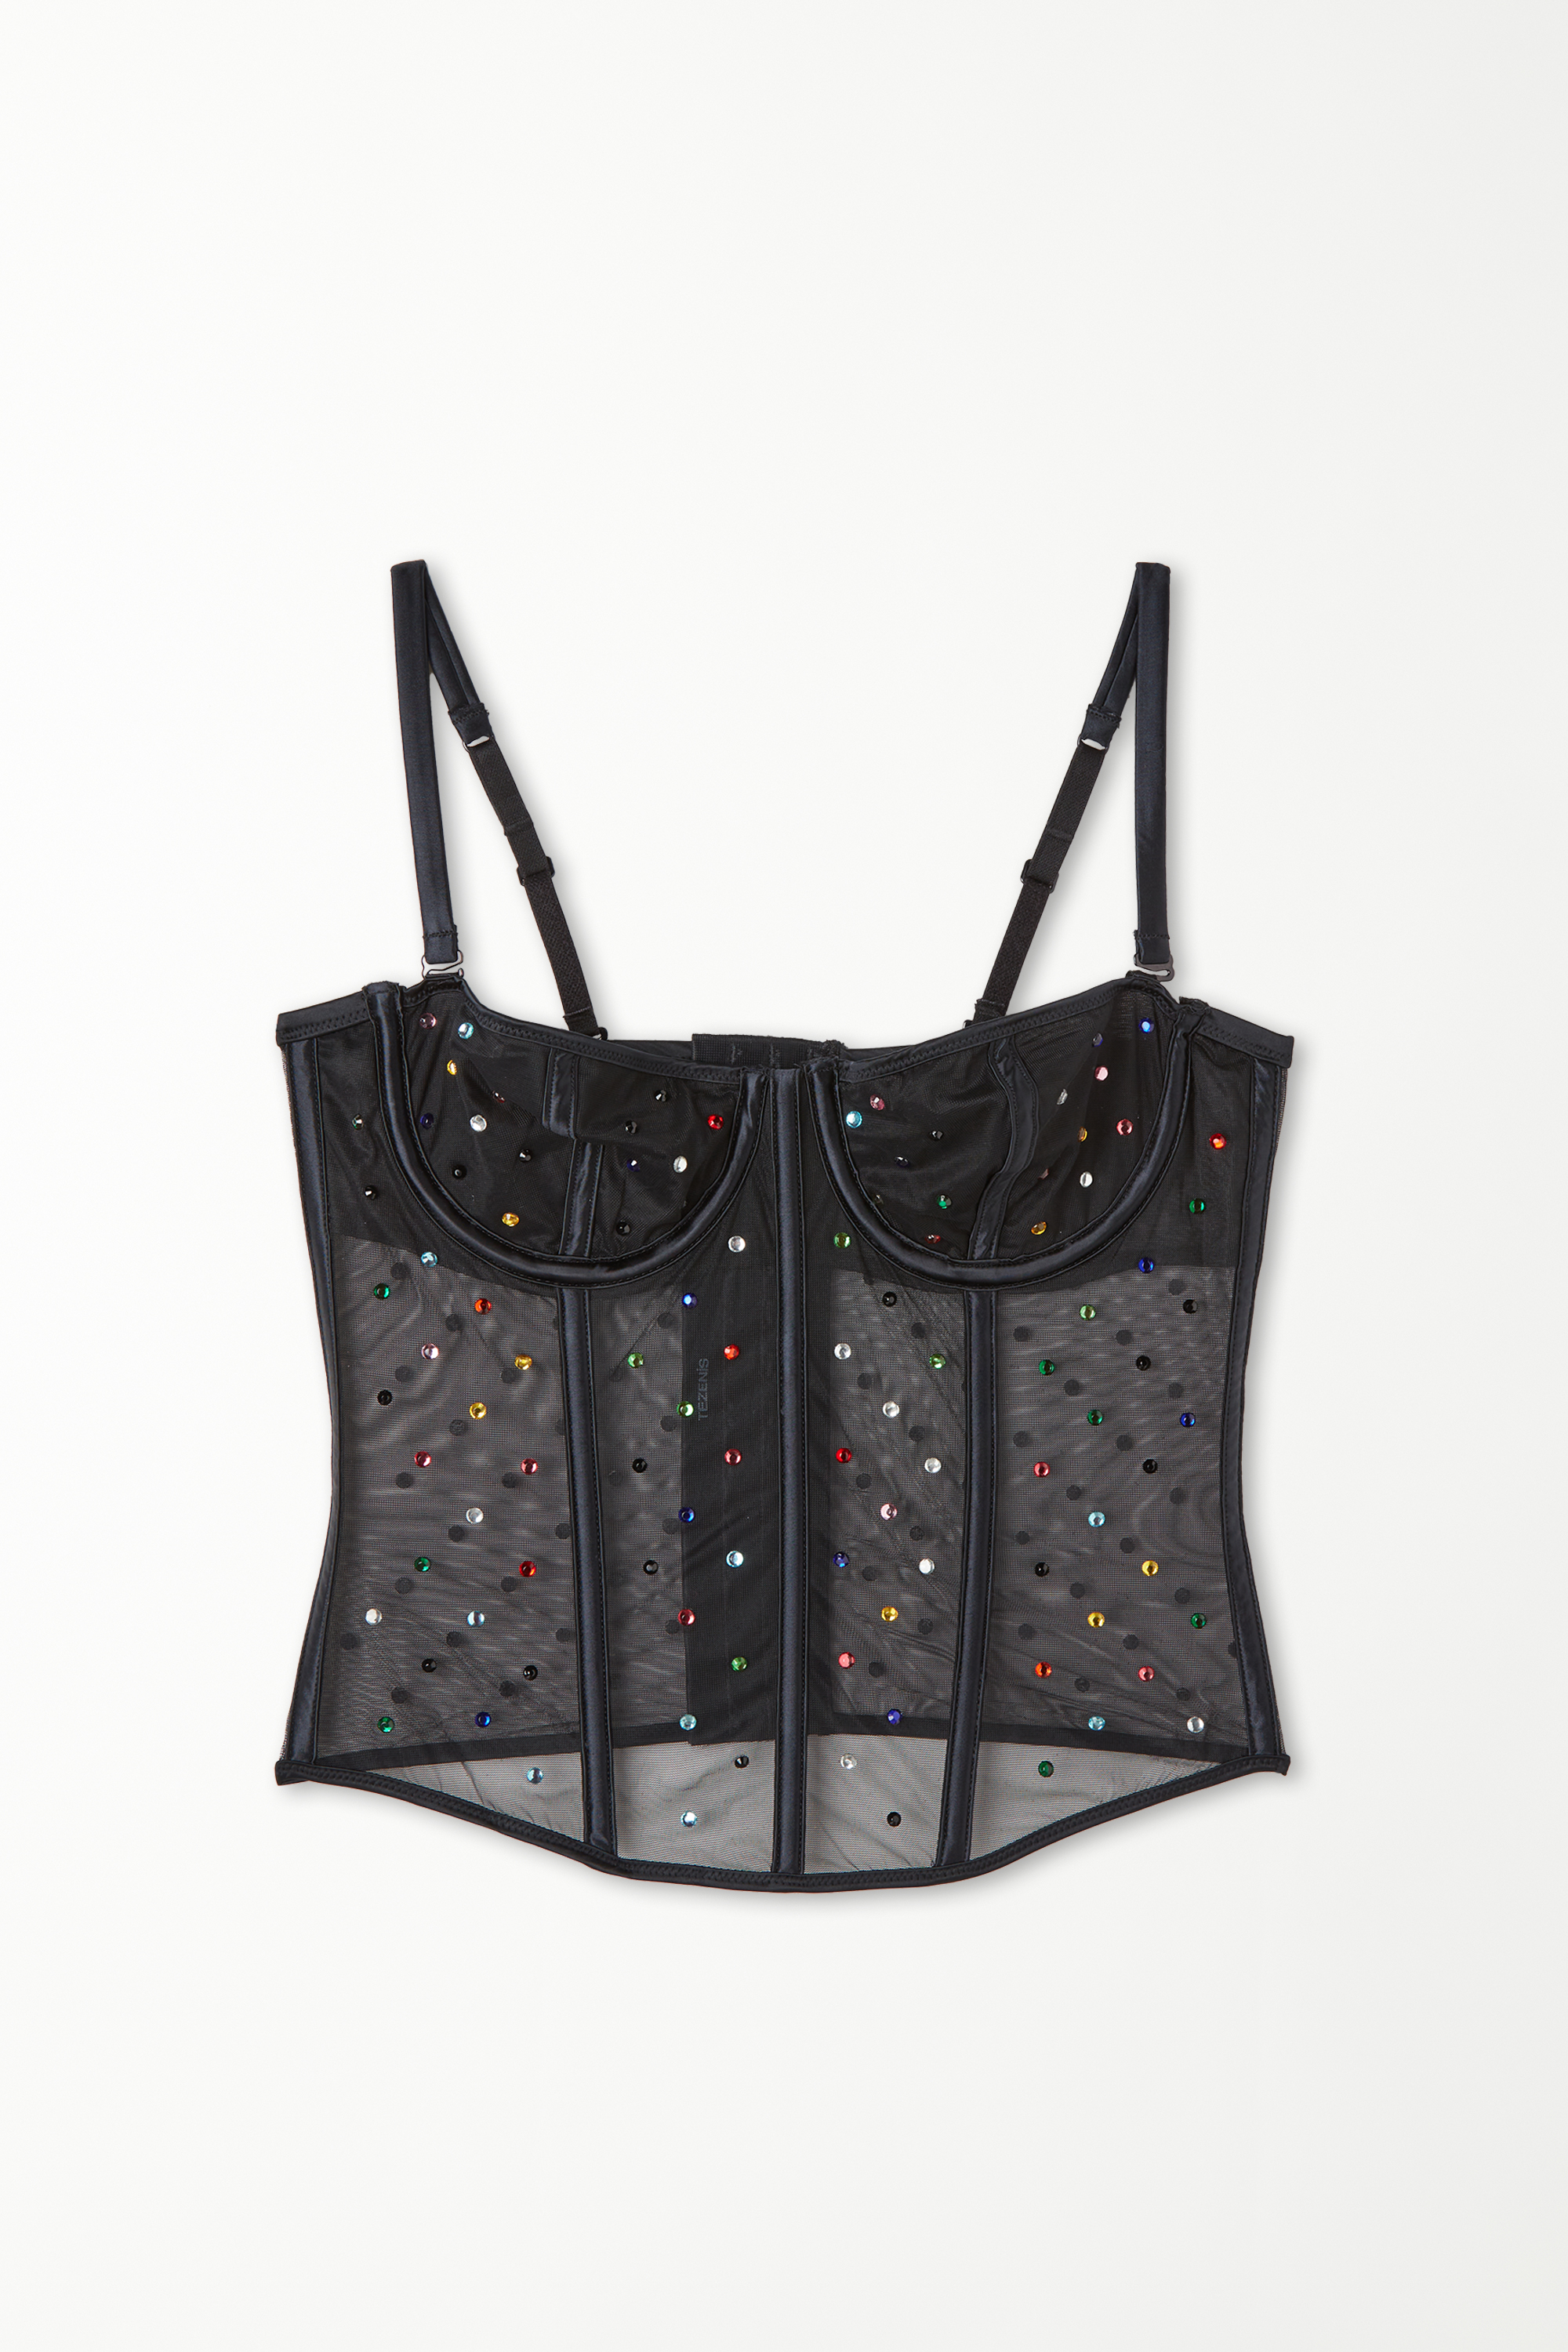 Limited Edition Balconette Bra Top with Colored Rhinestones